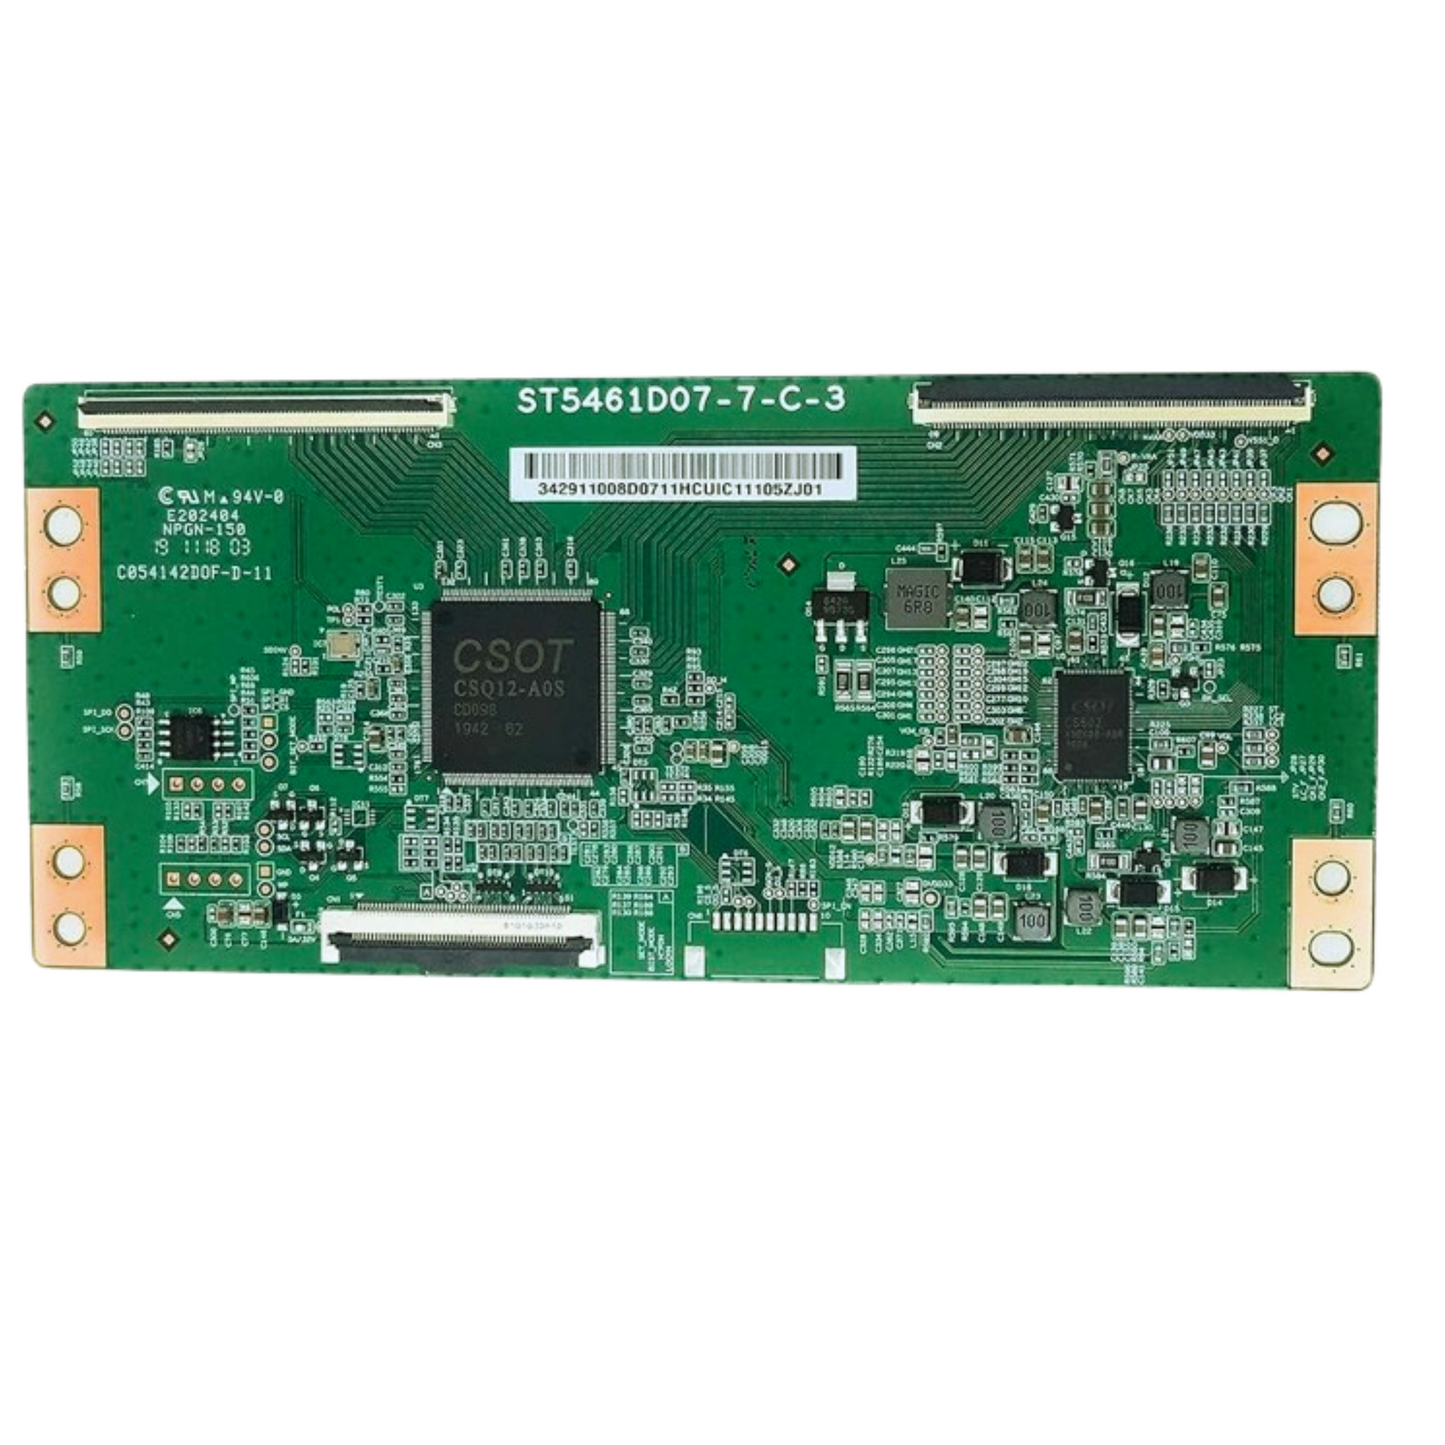 Tcon Board ST5461D07-7-C-3 suitable for TCL tv